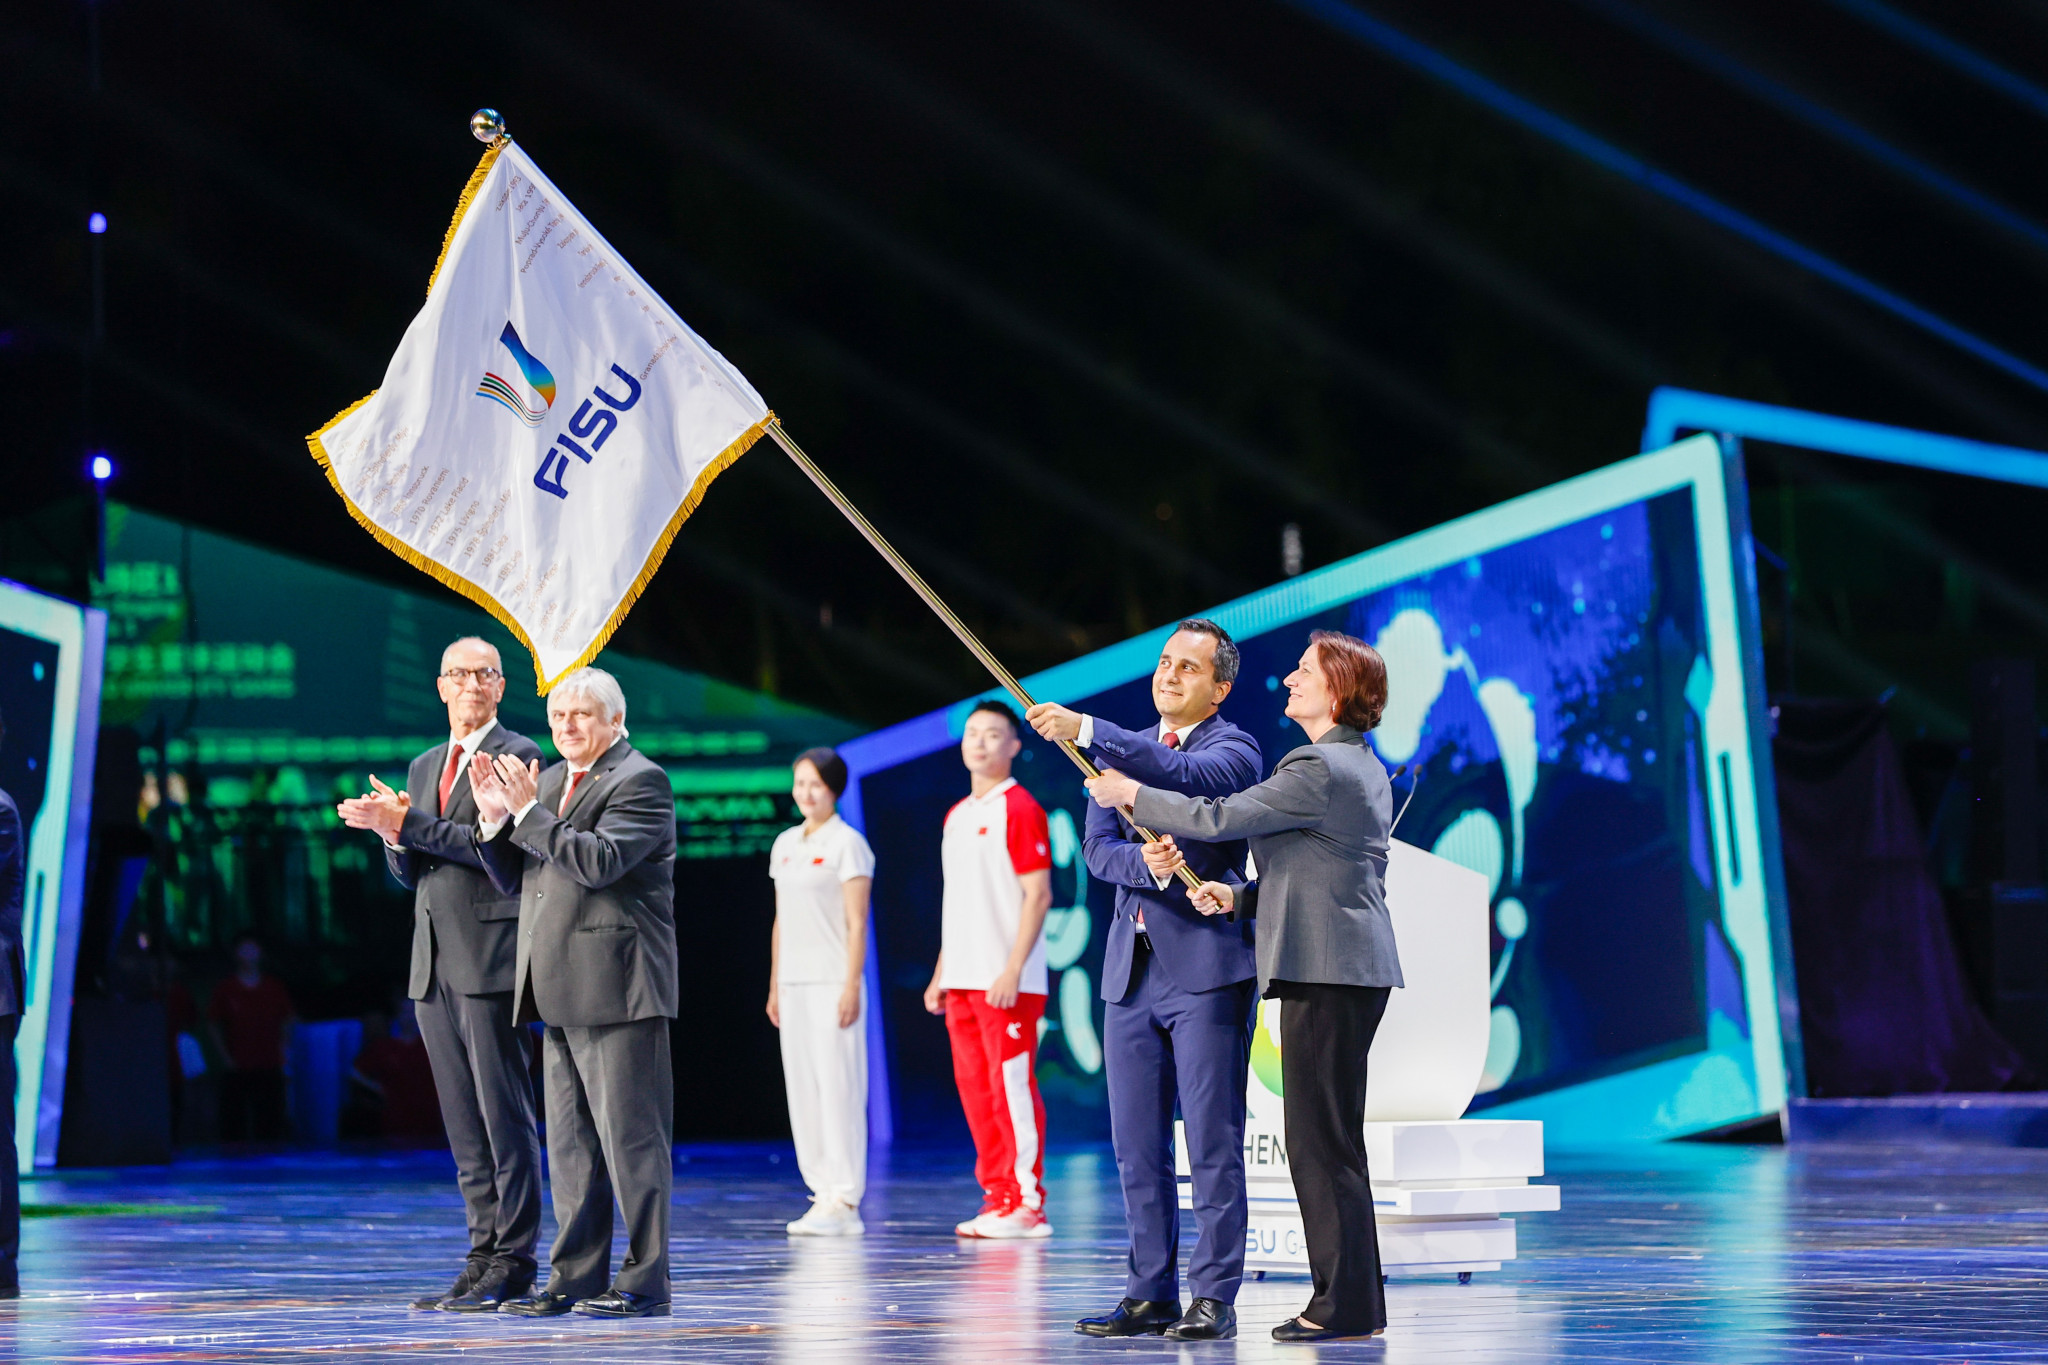 The FISU flag is waved by Mahmut Özdemir, Secretary of State in Germany’s Ministry of Interior and Community, and German FISU Executive Committee member Verena Burk, after it had been passed to Rhine-Ruhr 2025 at the end of Chengdu 2021 ©Rhine-Ruhr 2025